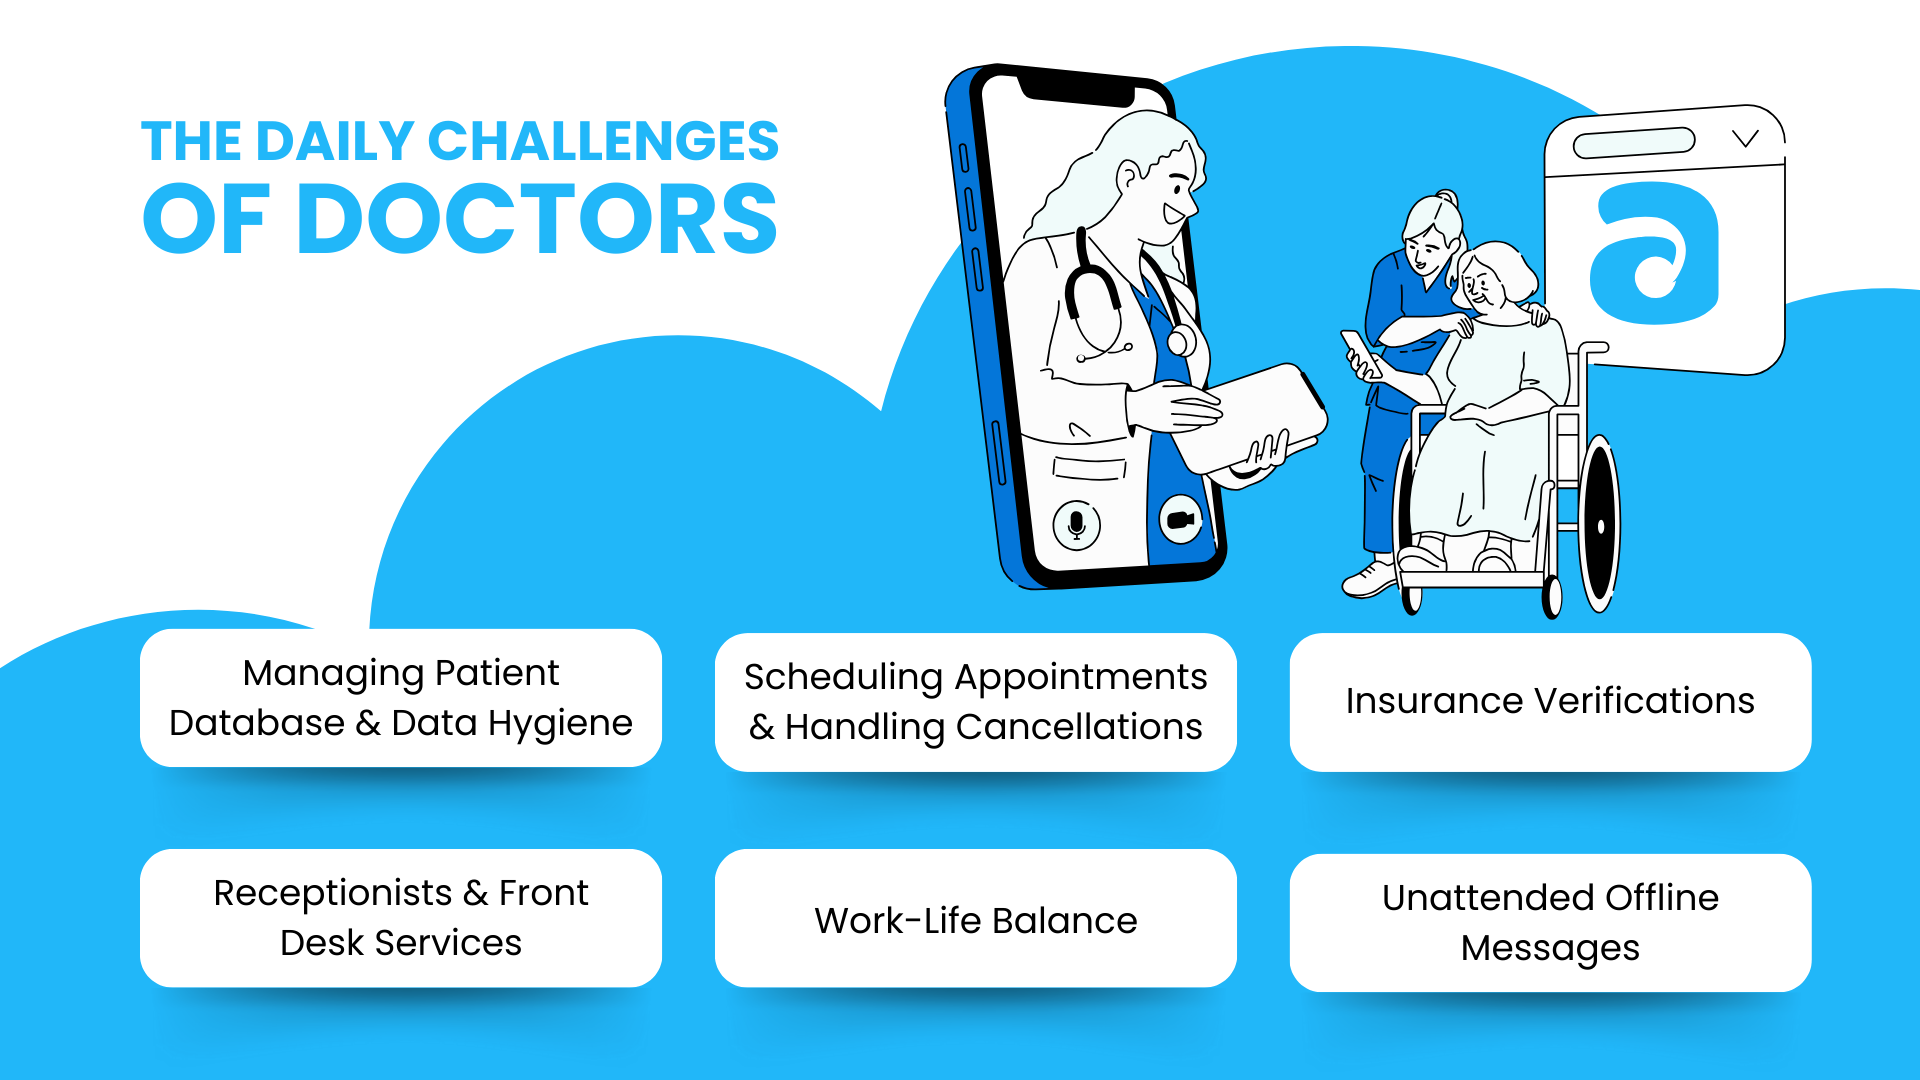 Accentline Solves Daily Challenges Of Doctors